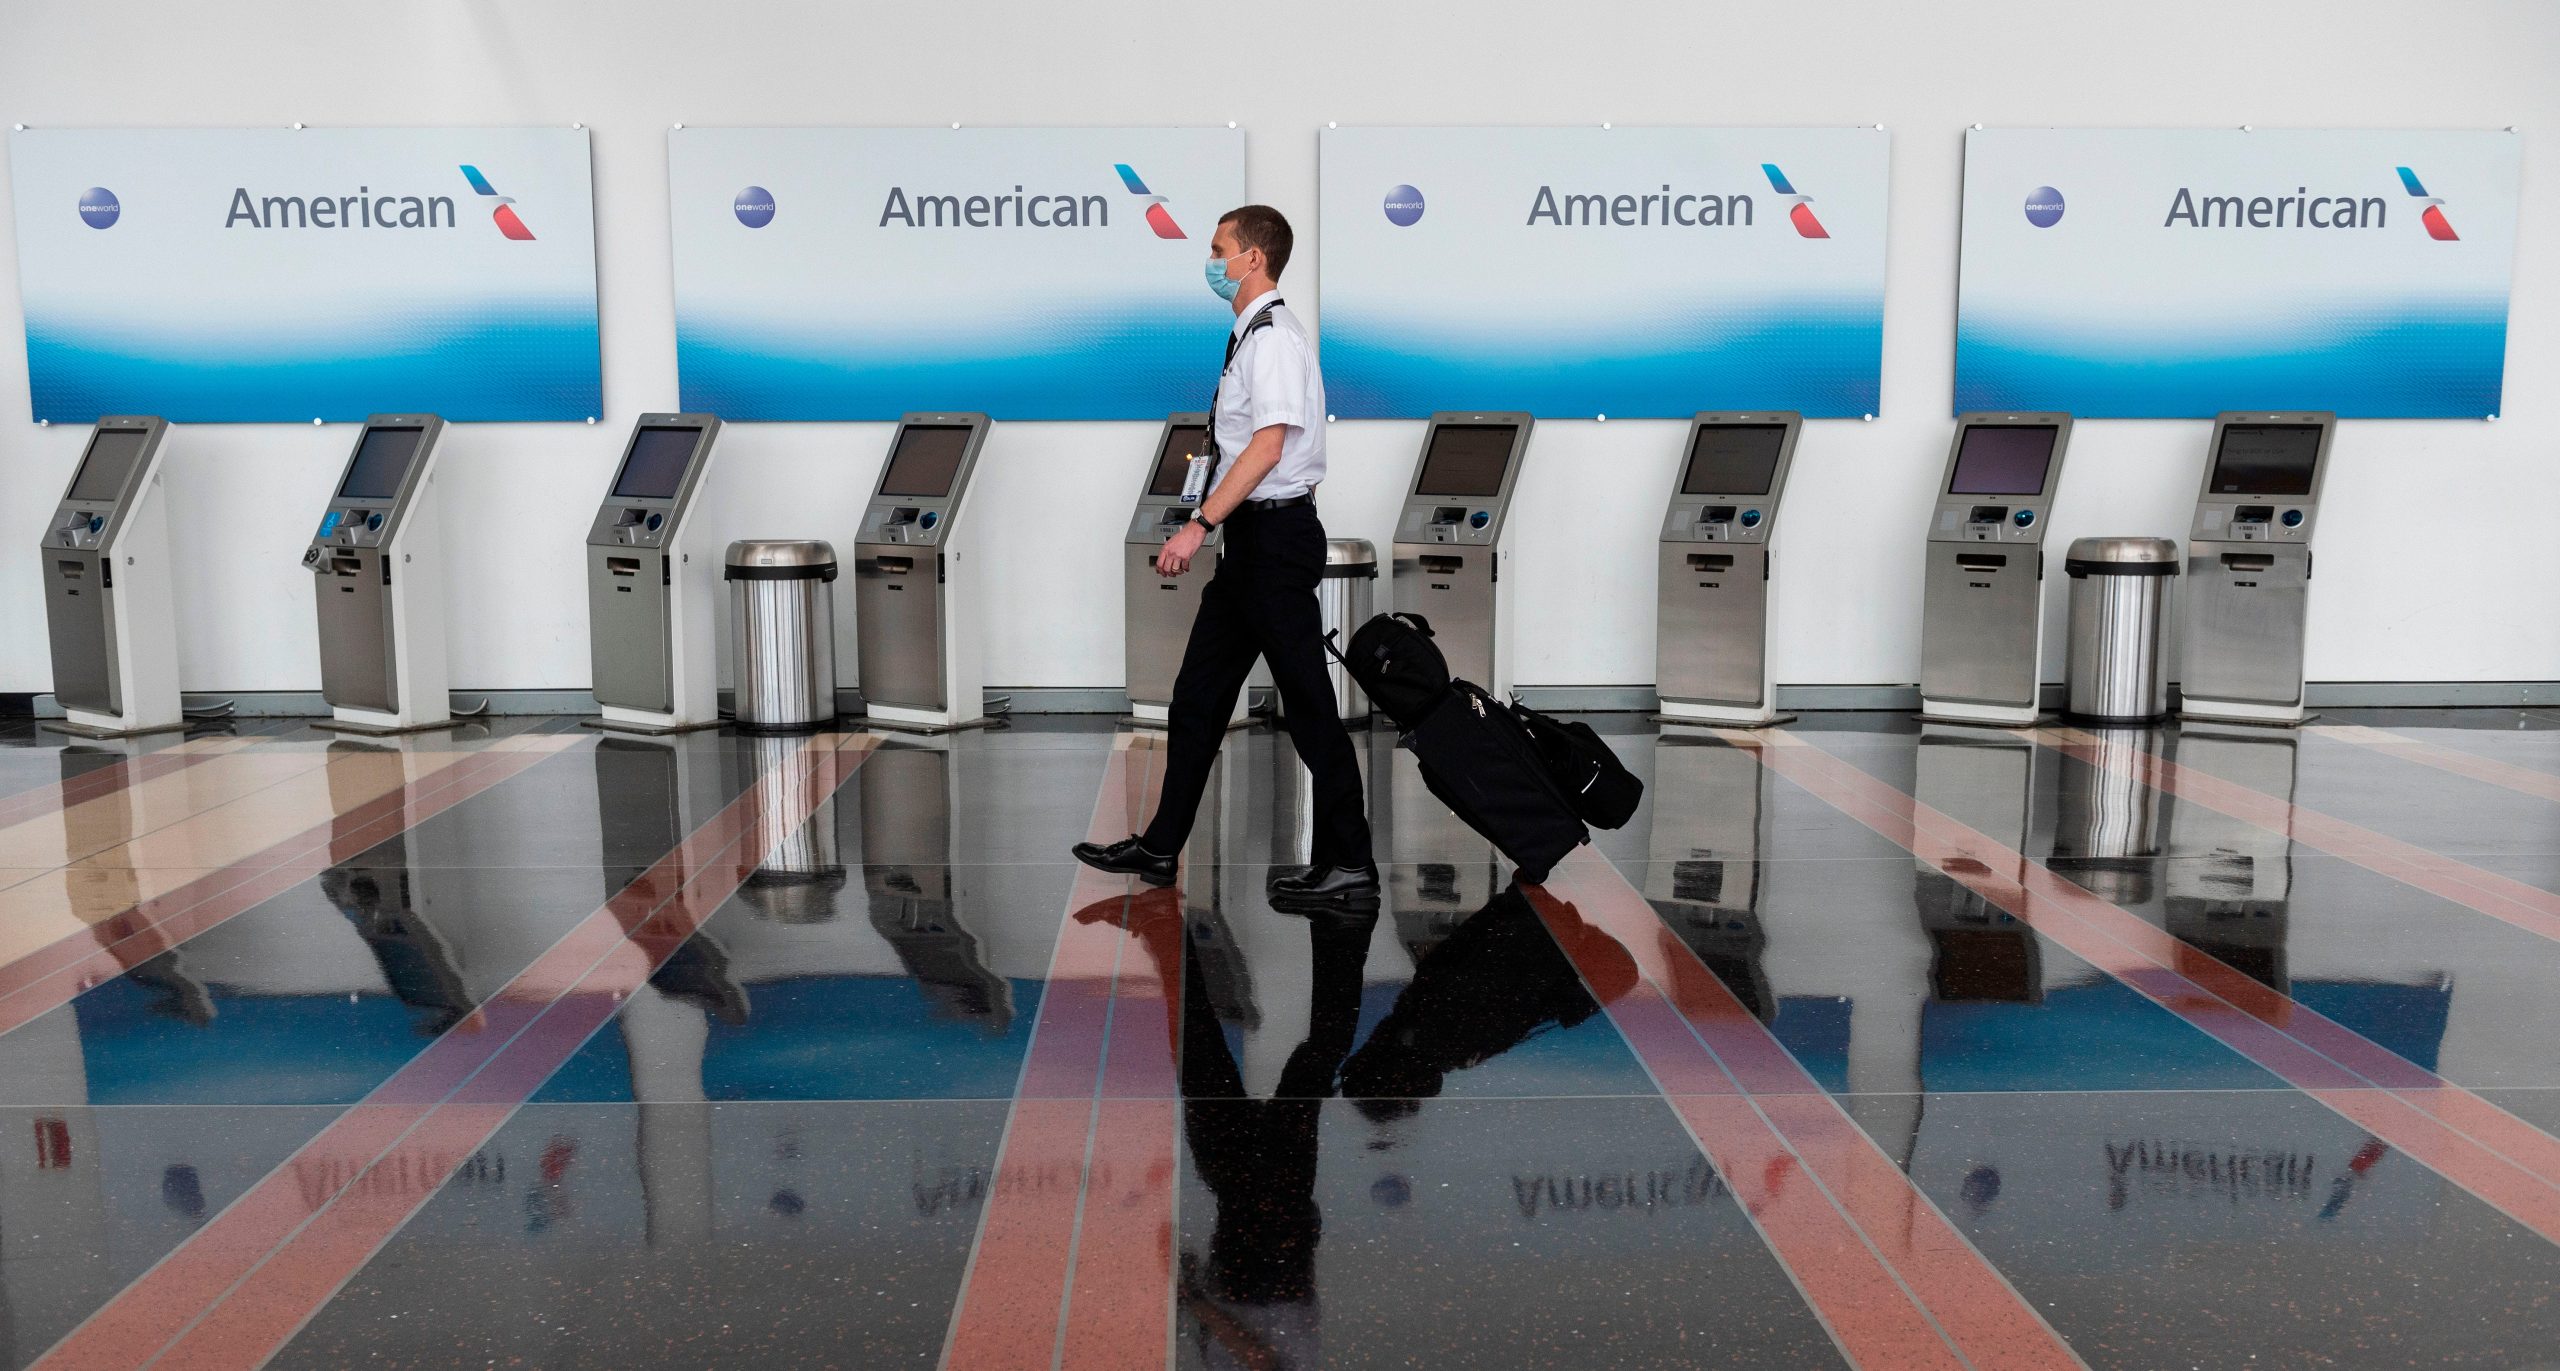 An airline employee walks past empty American Airlines check-in terminals at Ronald Reagan Washington National Airport in Arlington, Virginia, on May 12, 2020. - The airline industry has been hit hard by the COVID-19 pandemic, with the number of people flying having decreased by more than 90 percent since the beginning of March.